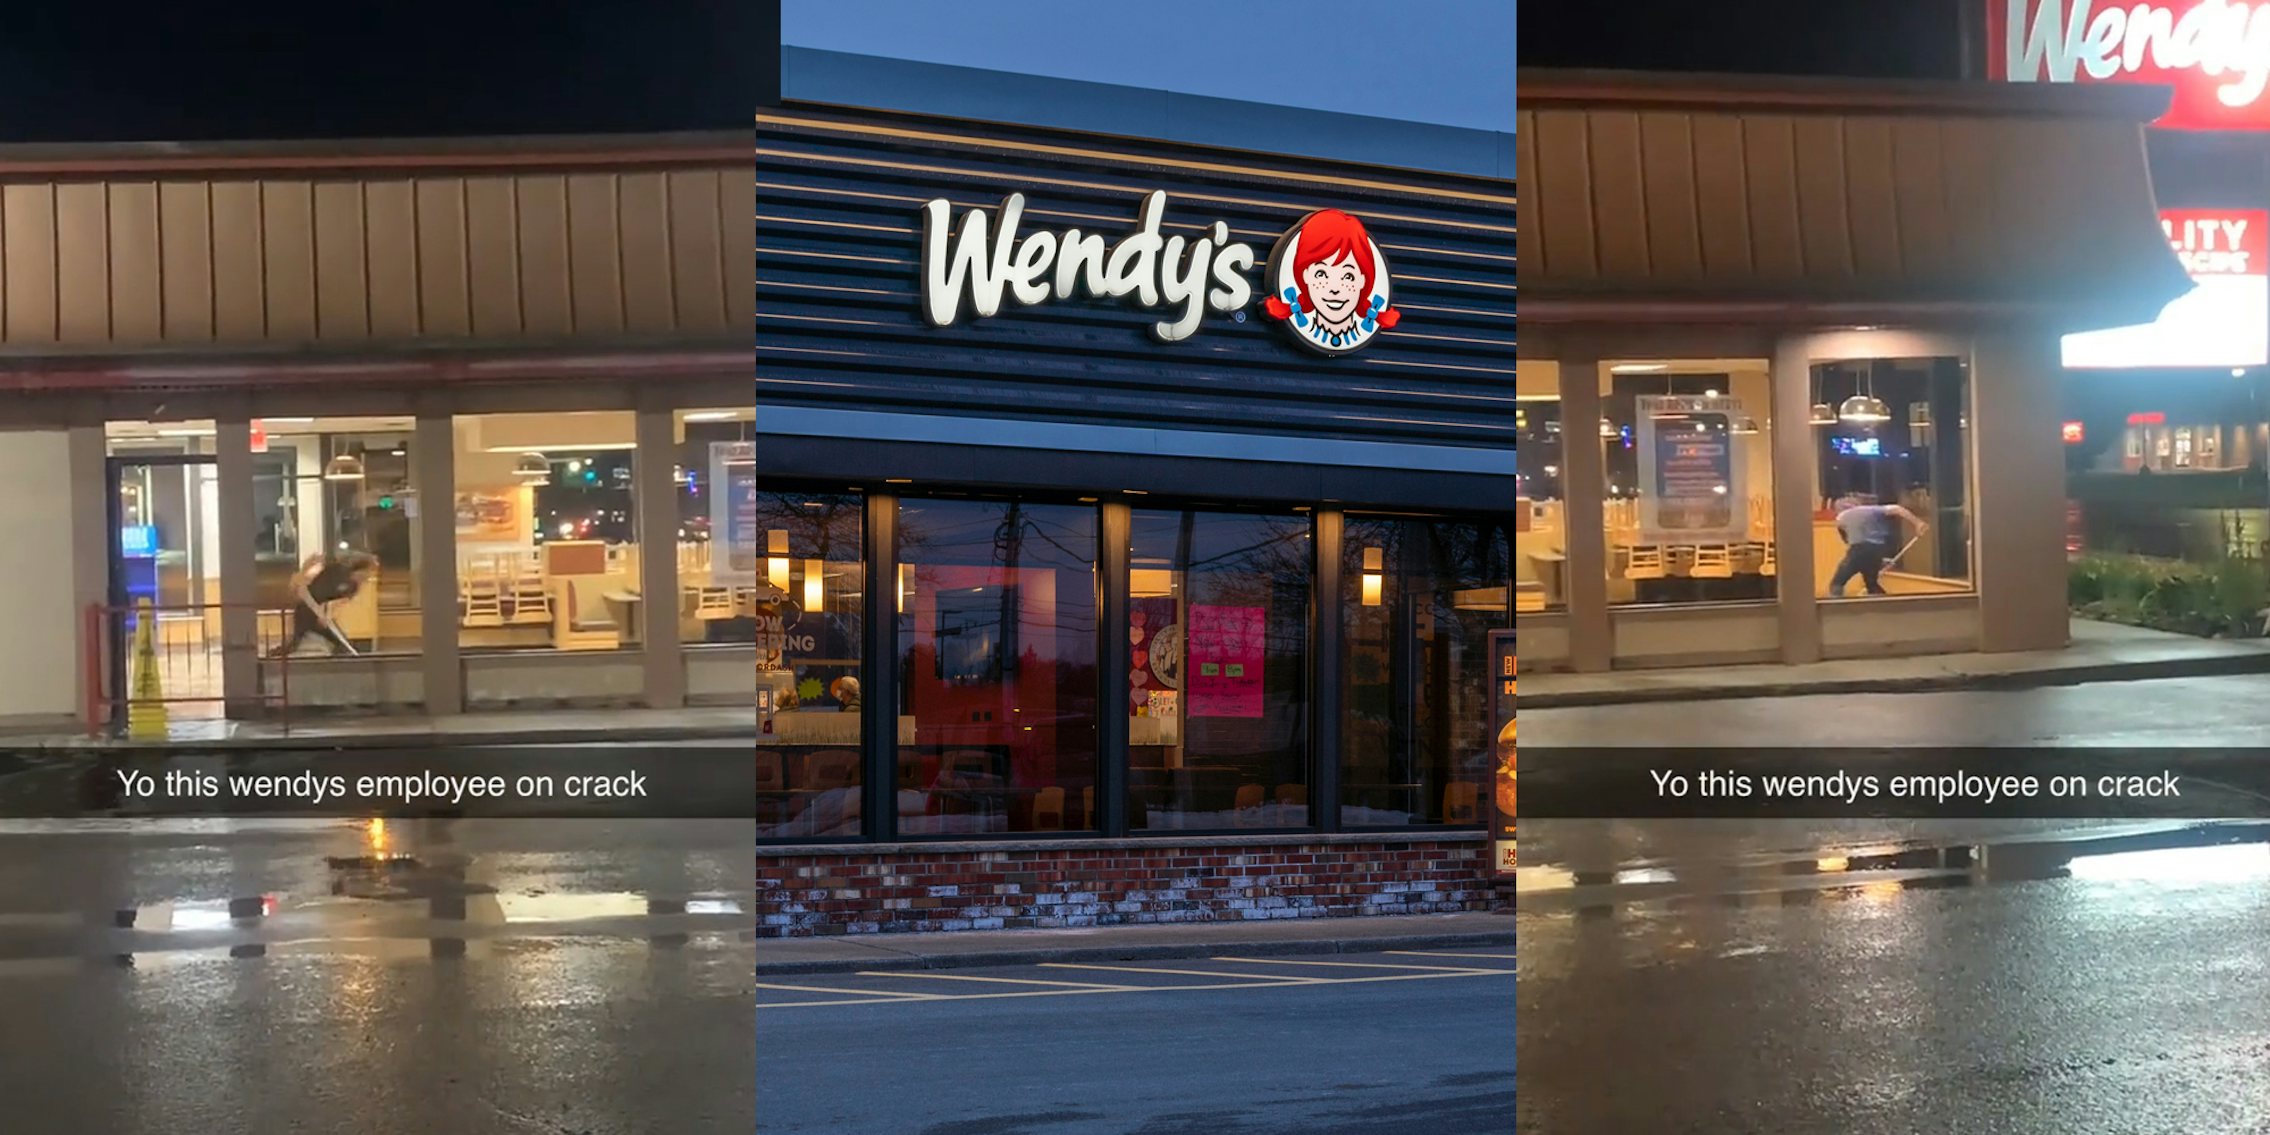 Wendy's worker speed mopping the store with caption 'Yo this wendys employee on crack' (l) Wendy's building with sign at night (c) Wendy's worker speed mopping the store with caption 'Yo this wendys employee on crack' (r)